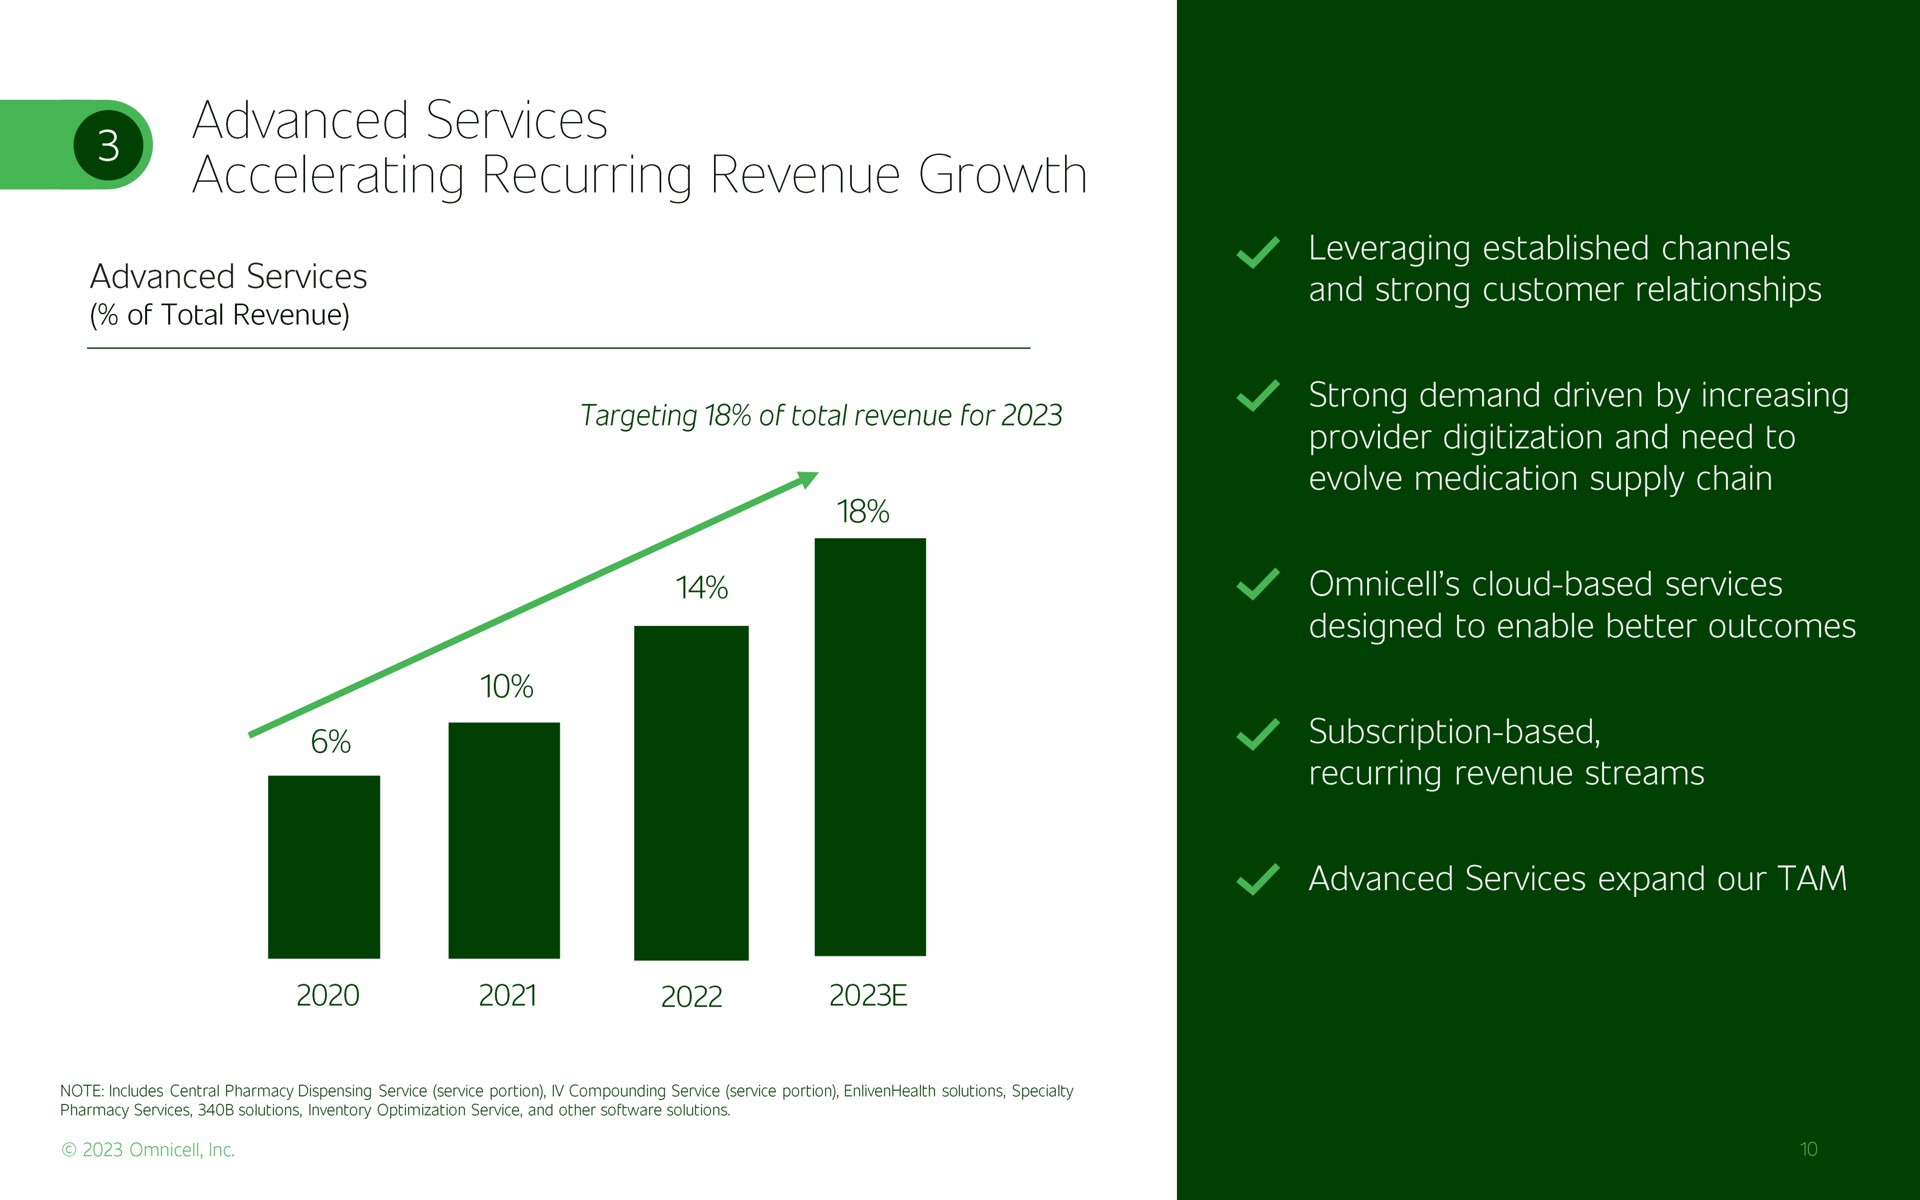 advanced services accelerating recurring revenue growth leveraging established channels and strong customer relationships strong demand driven by increasing provider and need to evolve medication supply chain designed to enable better outcomes subscription based recurring revenue streams advanced services expand our tam | Omnicell